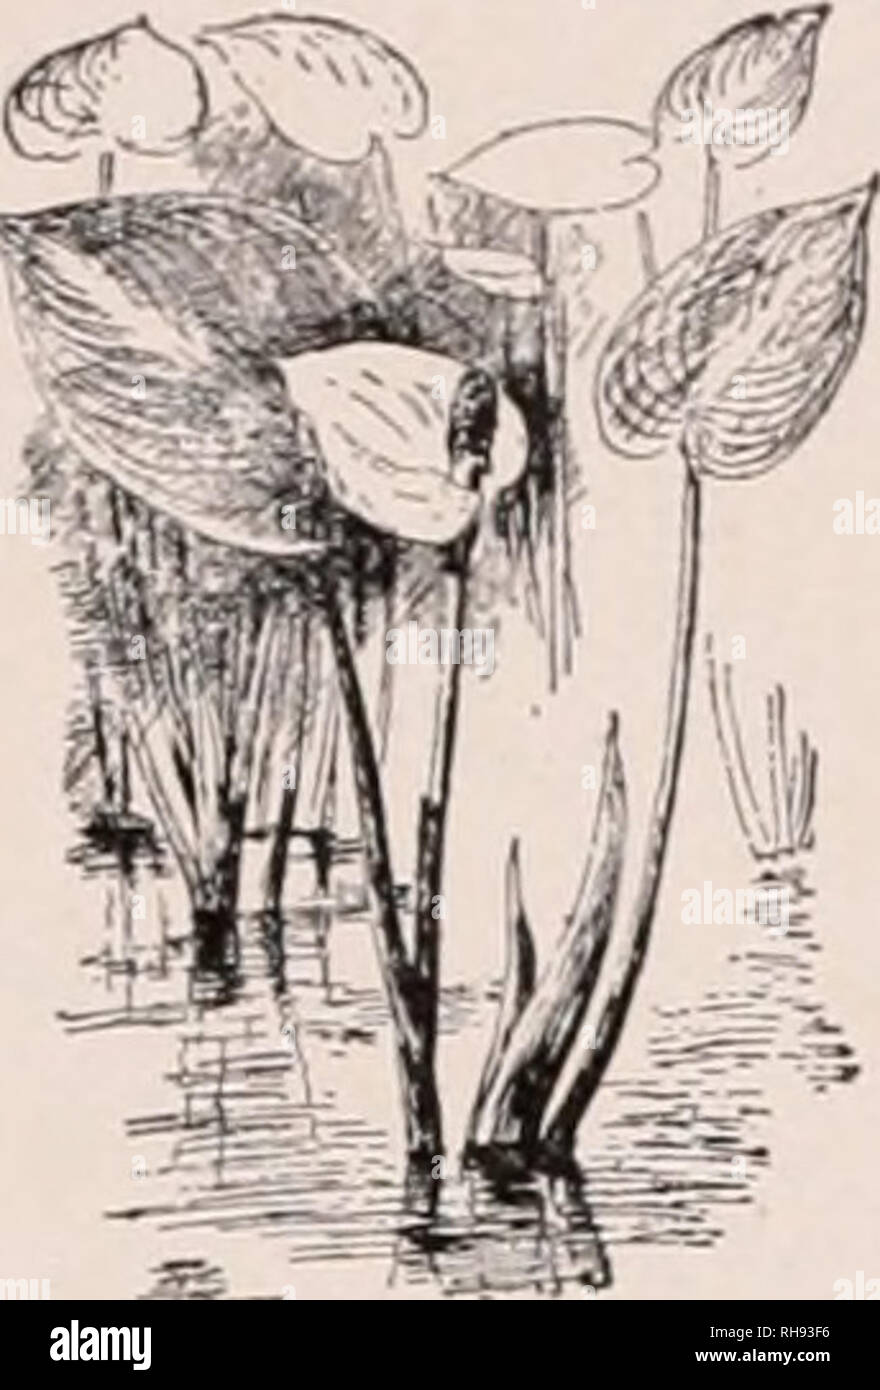 . Botany; an elementary text for schools. Plants. 296 THE KINDS OF PLANTS R. Africana, Kunth. Valla or Calla lily of gardens. Fig. 427. Leaf- blades broadly arrow-shaped, simple and entire, cross-veined, glossy: spathe white and wax-like. Cape of Good Hope. 4. CALLA. Differs from the above in having a spathe which d()( &gt; not inclose the spadix, and mostly perfect flowers (tiie upper ones sometimes staminate), each of 6 sta- niLii^ and 1 ovary: fruit a red berry. One species. C palustris, Linn. True Calla. Fig. 428. Leaves about 1 ft. high, the blades arrow-shaped: spathe about 2 in lung, wh Stock Photo